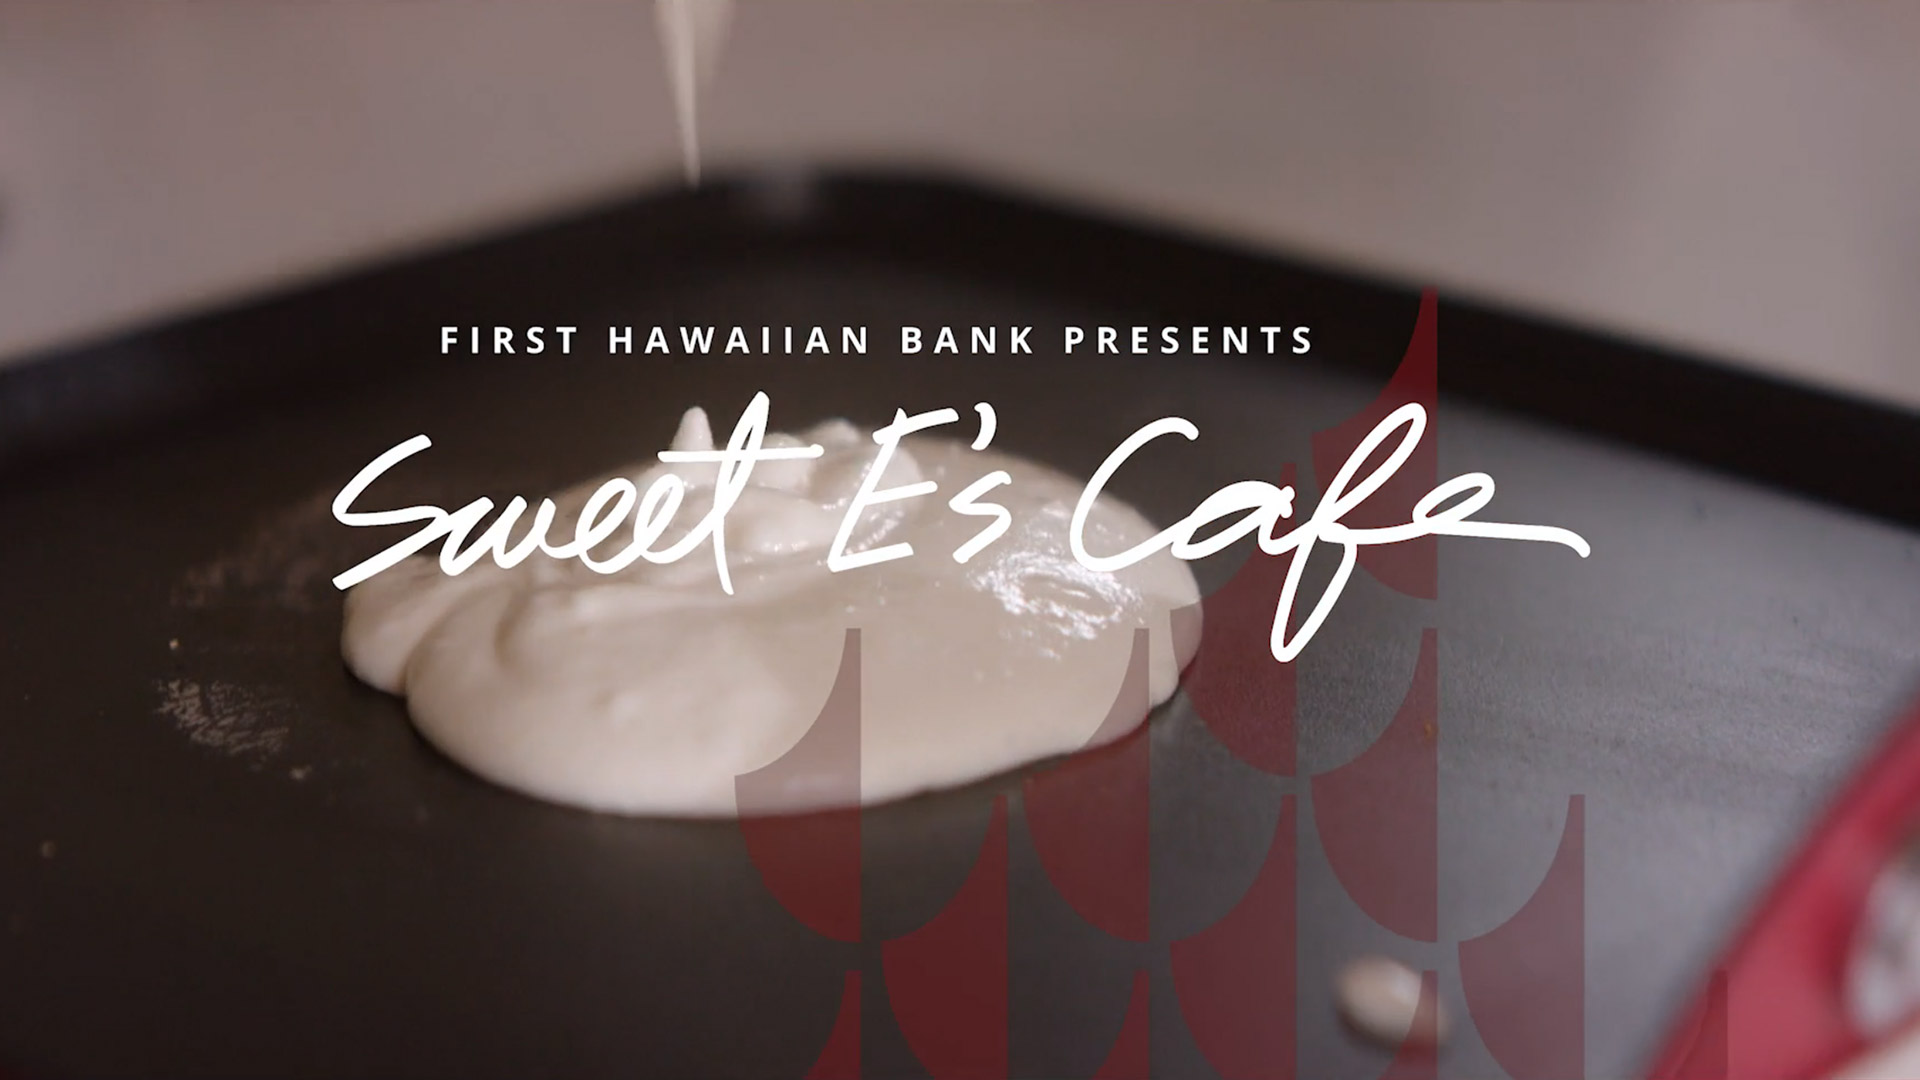 First Hawaiian Bank: Business Banking with Sweet E's (Full)